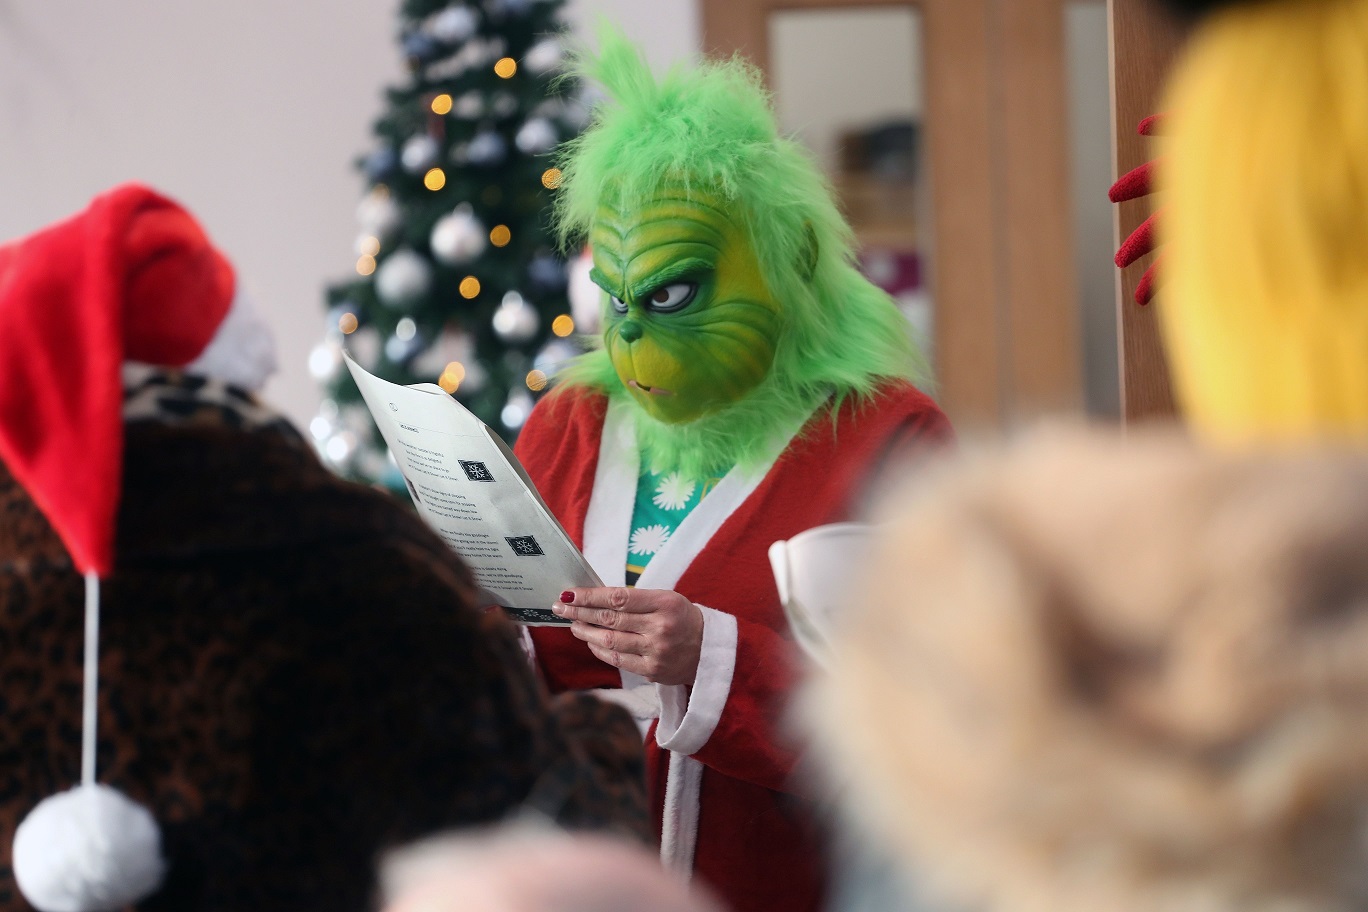 image of Grinch studying the Cafe menu